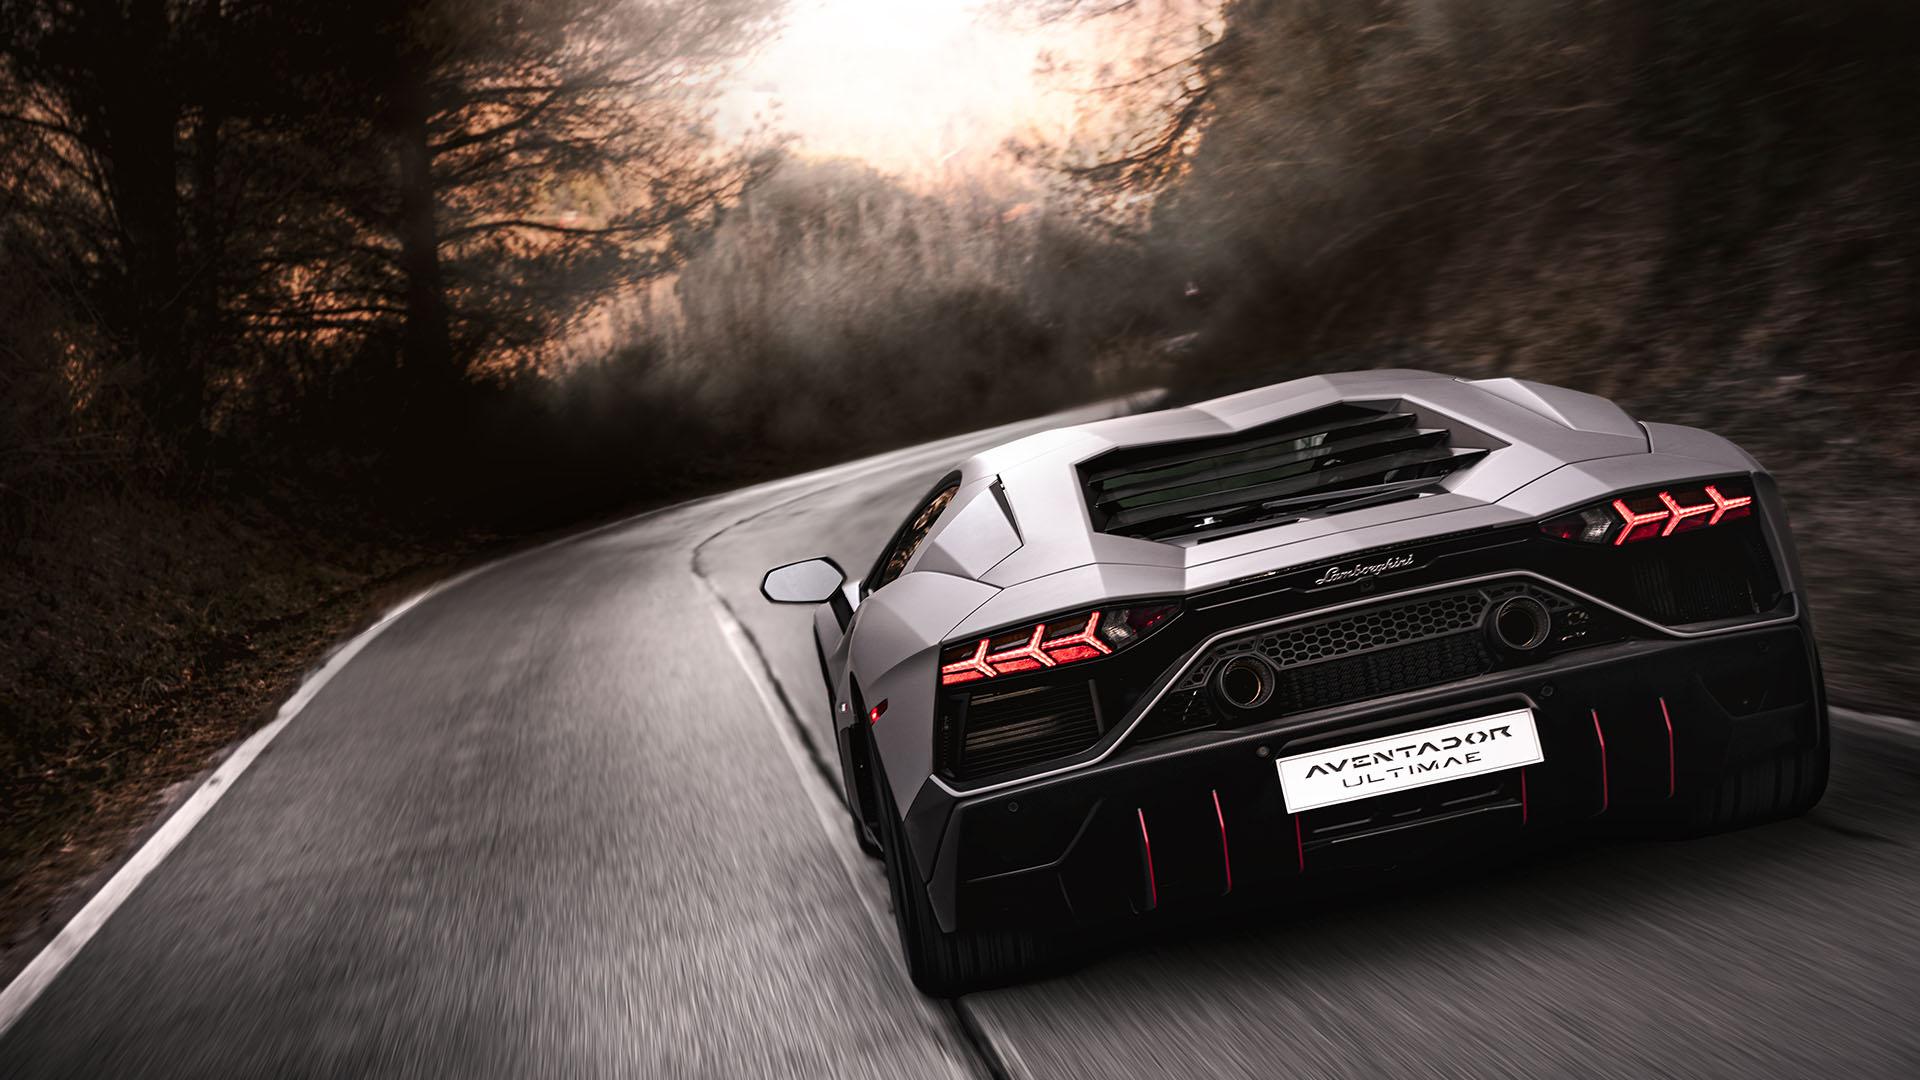 Aventador ultimae on the road 21